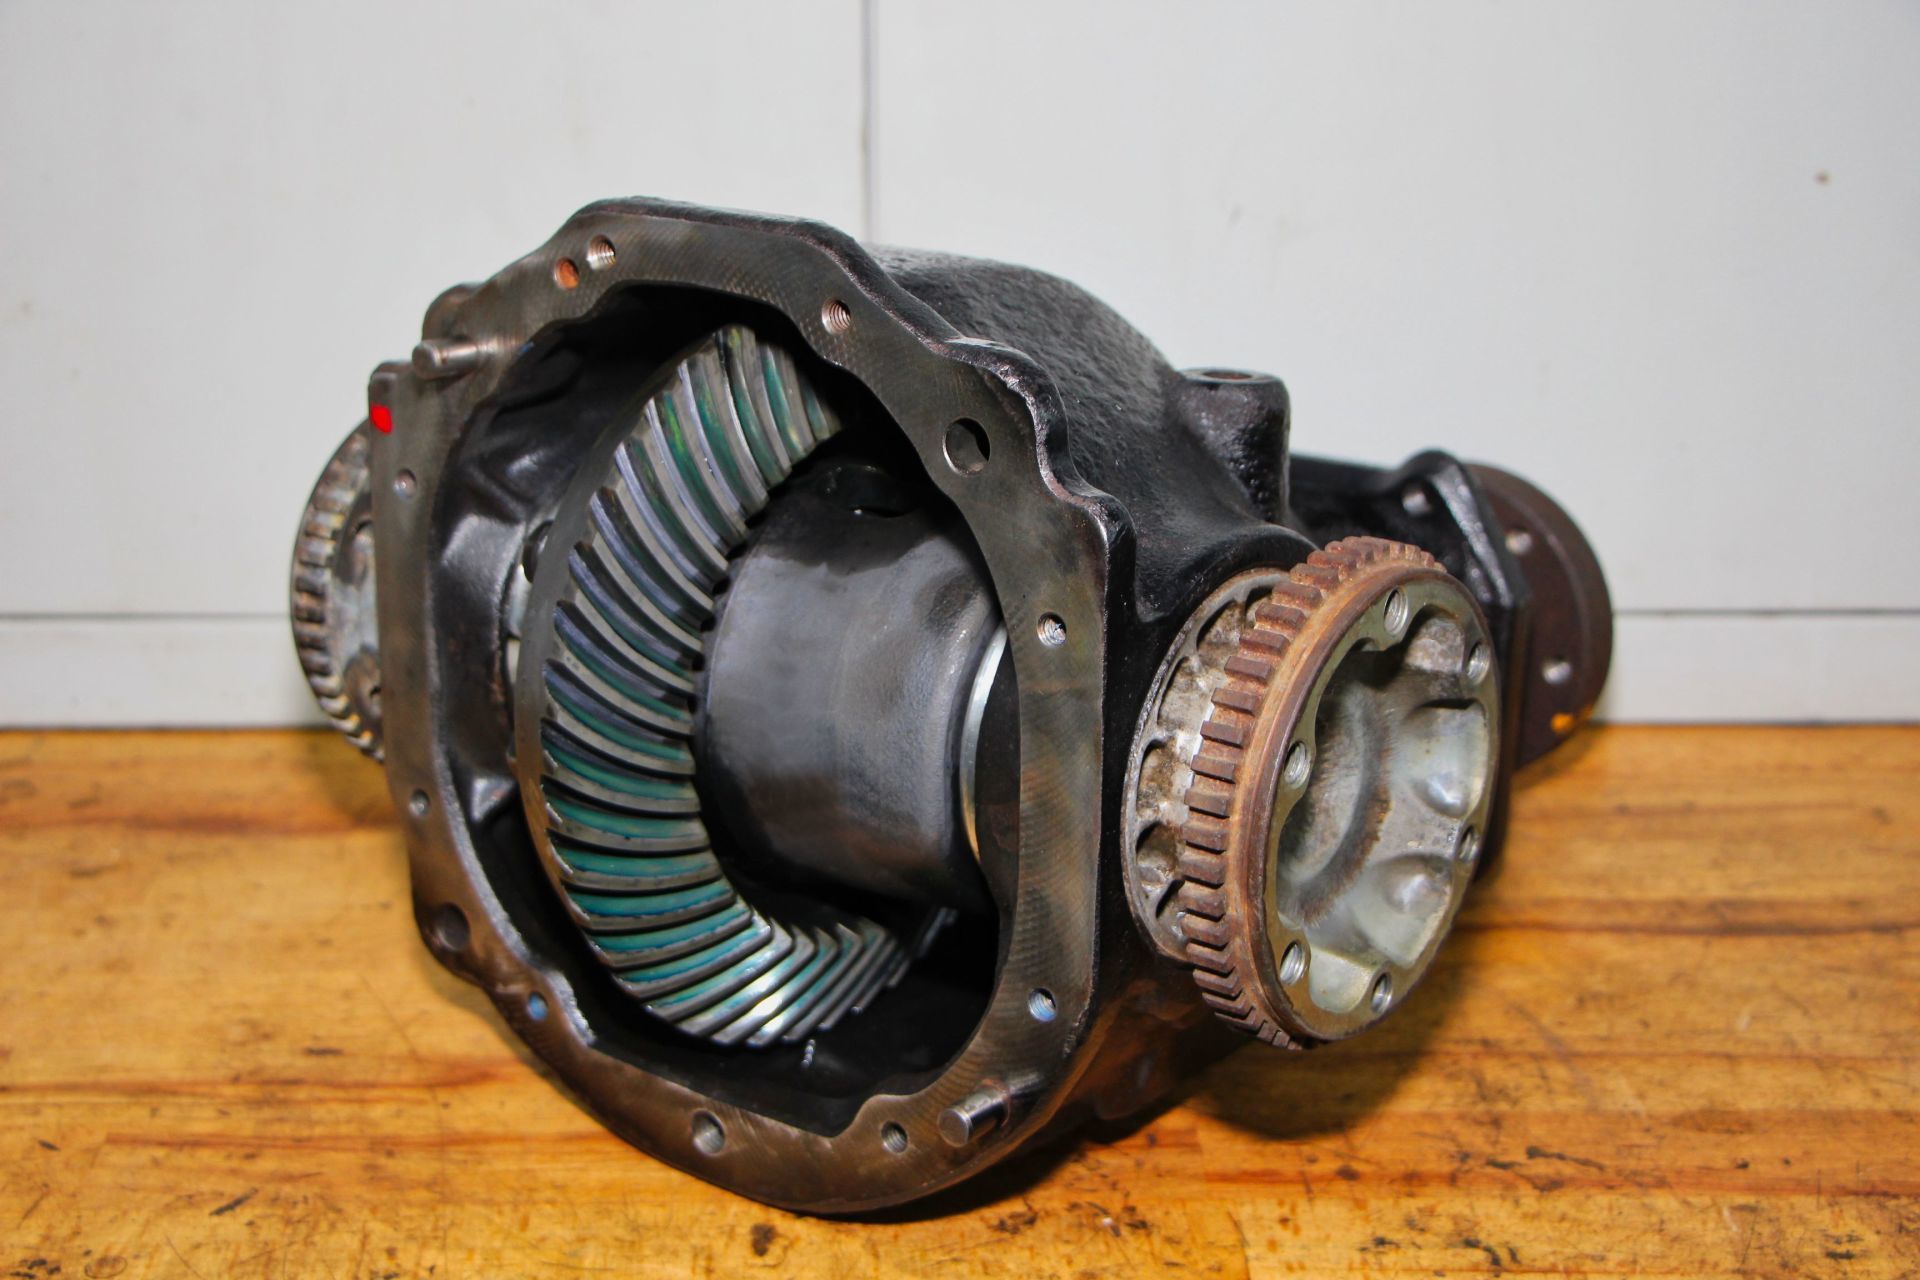 Differential IRS Überholung , Differential IRS Reparatur,  Differential  7.75, GM Differential IRS Überholung, DANA Differential IRS Überholung, DANA Differential 7.75 Überholung, GM Differential IRS Überholung, GM Differential 7.75 Überholung, Pontiac GTO Differential  Überholung, Pontiac GTO Differential Reparatur, Pontiac GTO Differential überholen, Pontiac GTO Differential Instandsetzung, Pontiac GTO Differential IRS Überholung